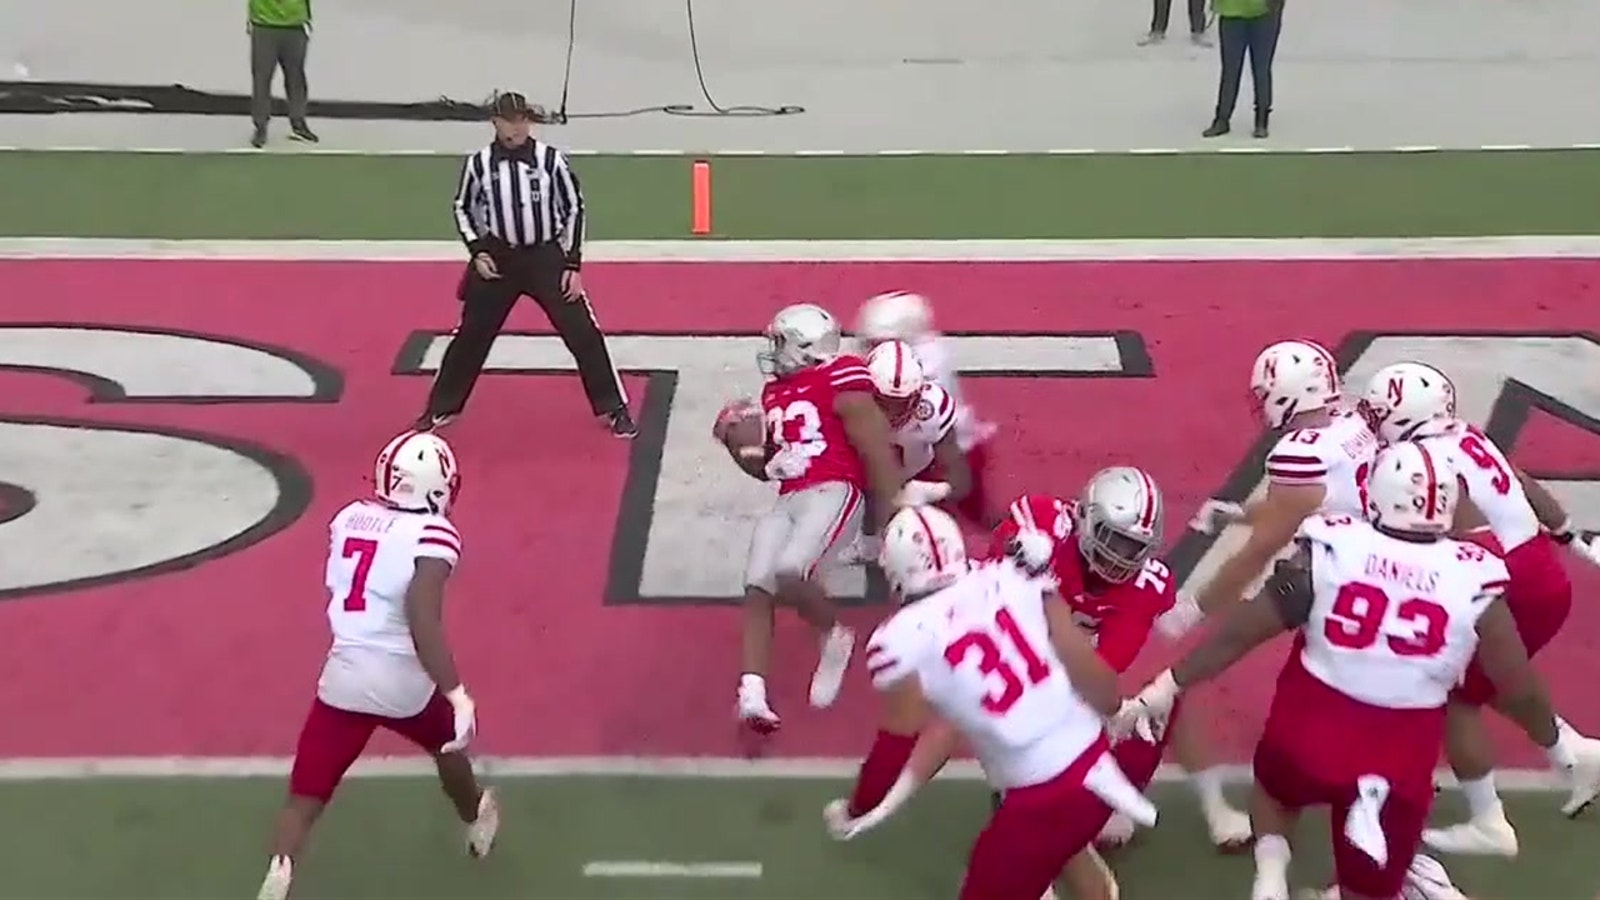 Master Teague barrels into the end zone to even score with Cornhuskers, 7-7